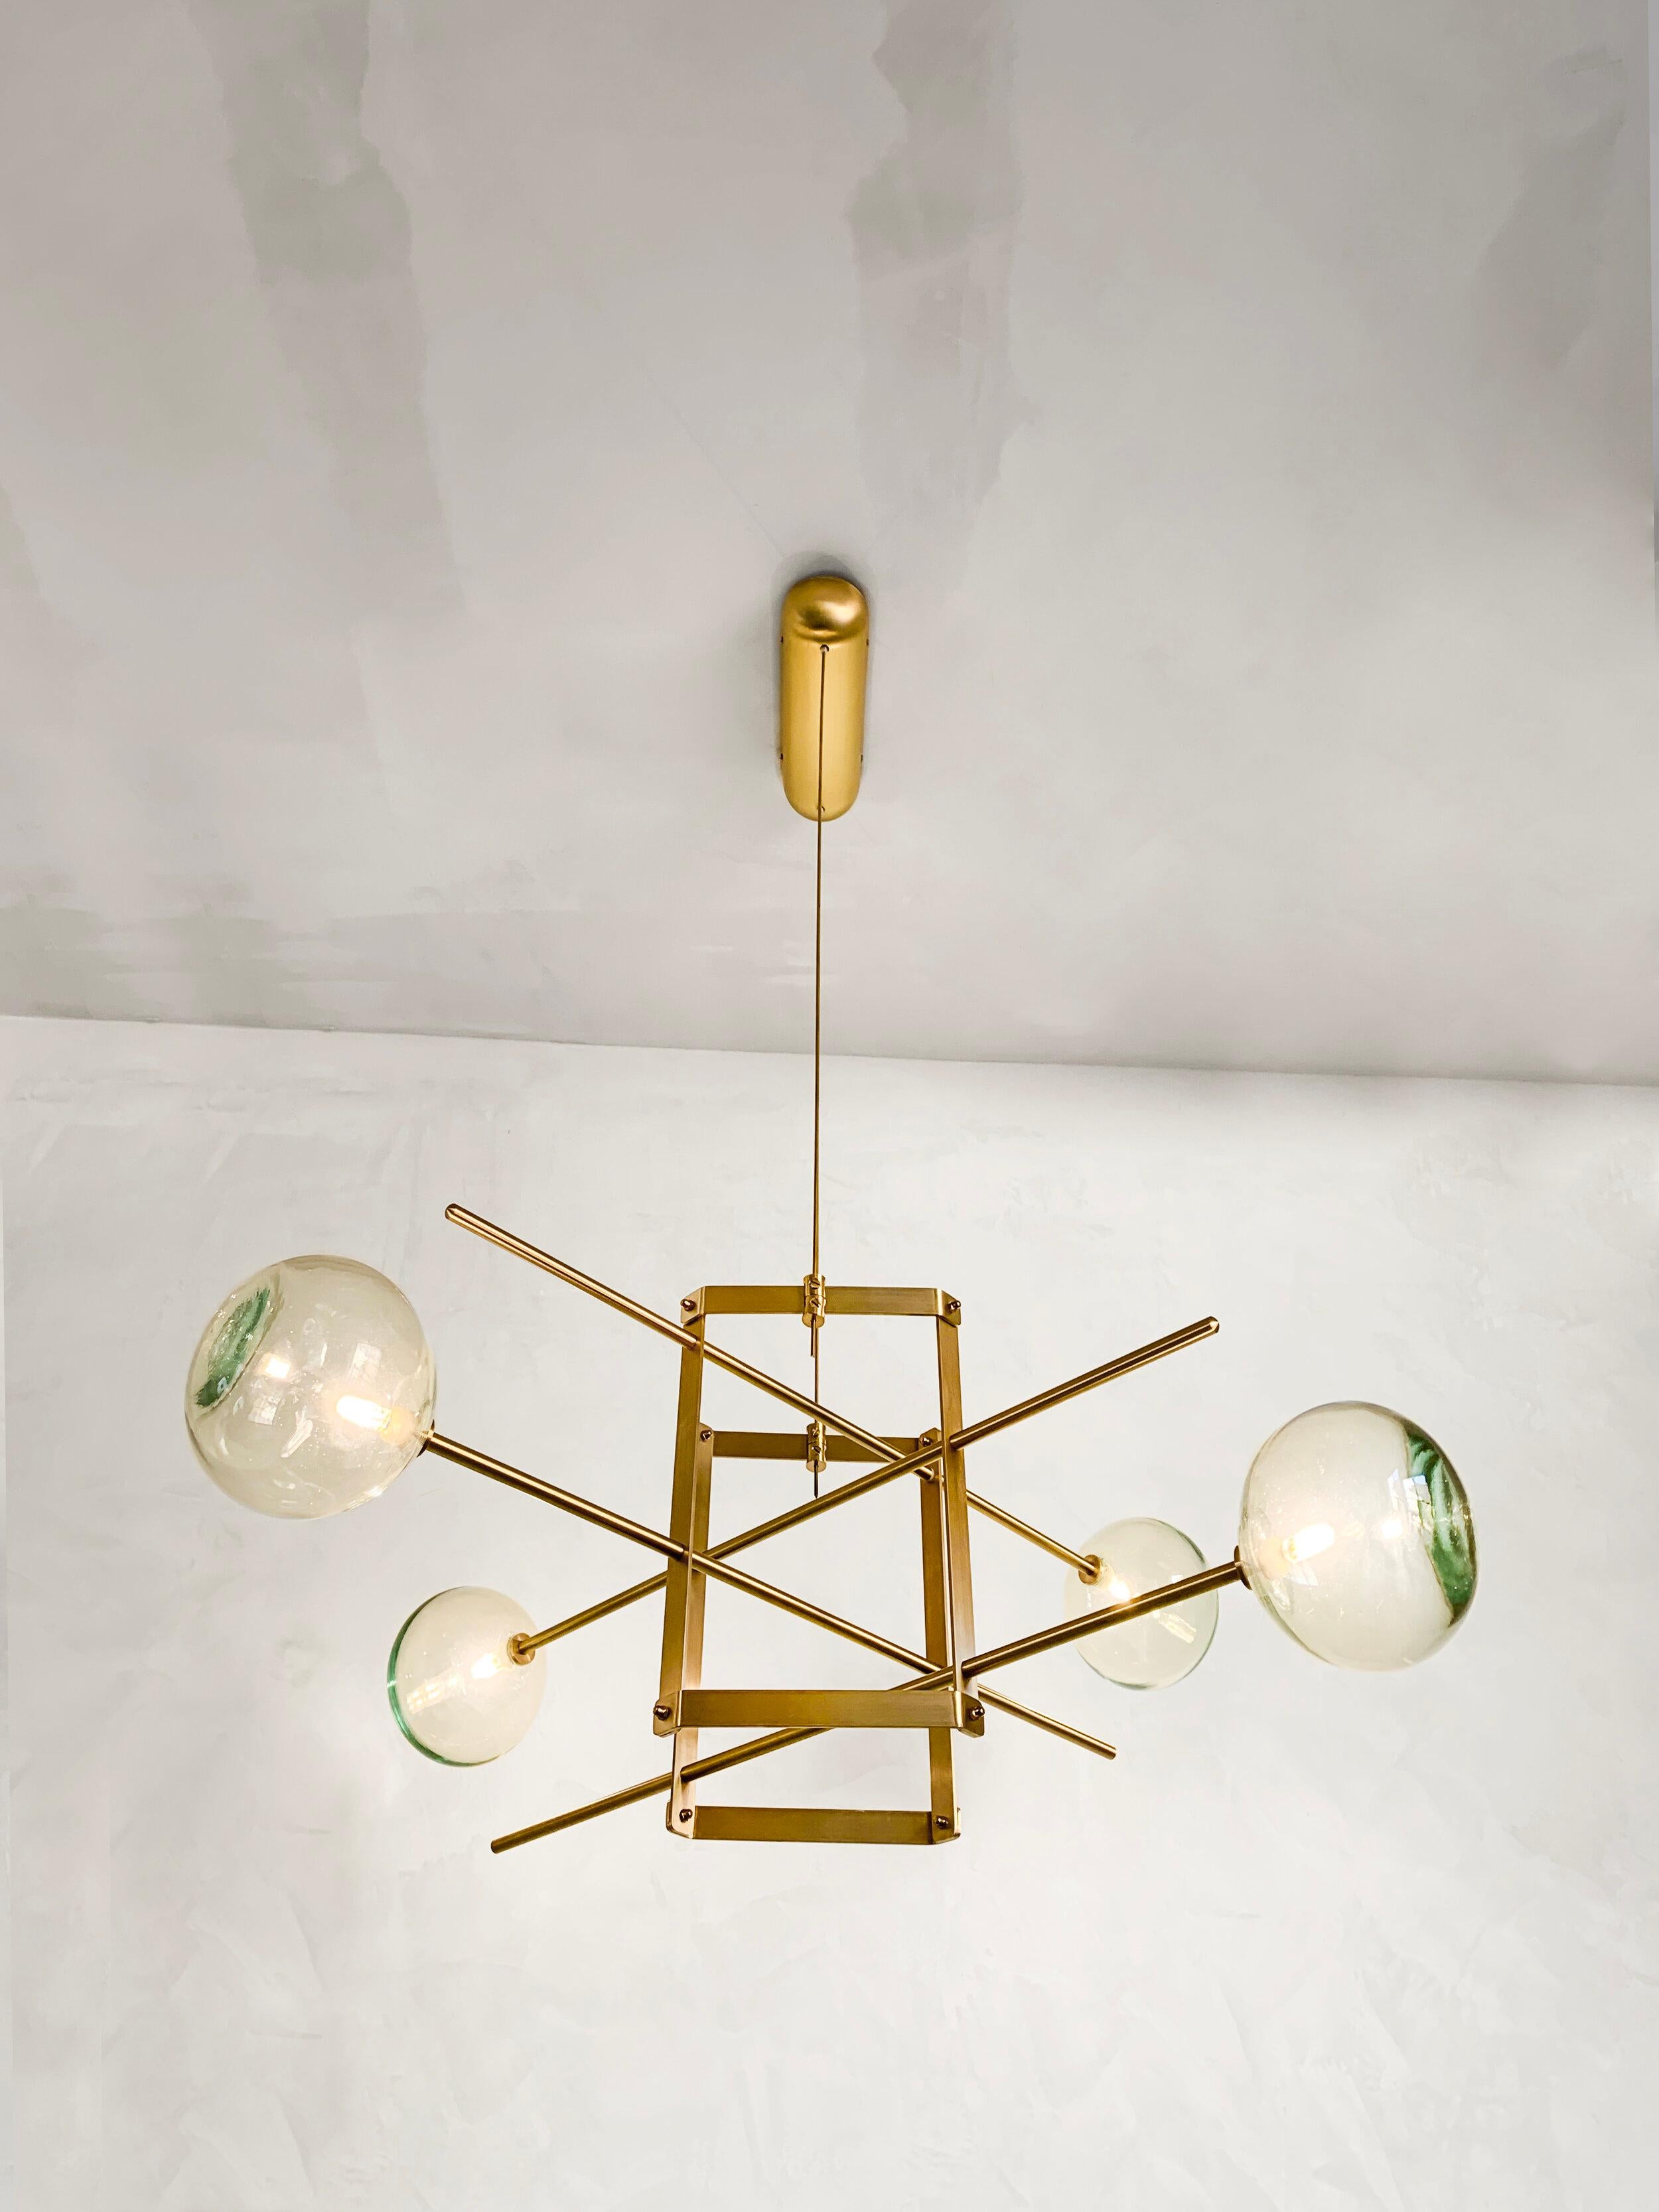 Modular chandelier 4 lamps by Contain.
Dimensions: D 85 x W 85 x H 29.5 cm (custom length).
Materials: Brass structure, blown glass from local production.
Available in different finishes and dimensions.

All our lamps can be wired according to